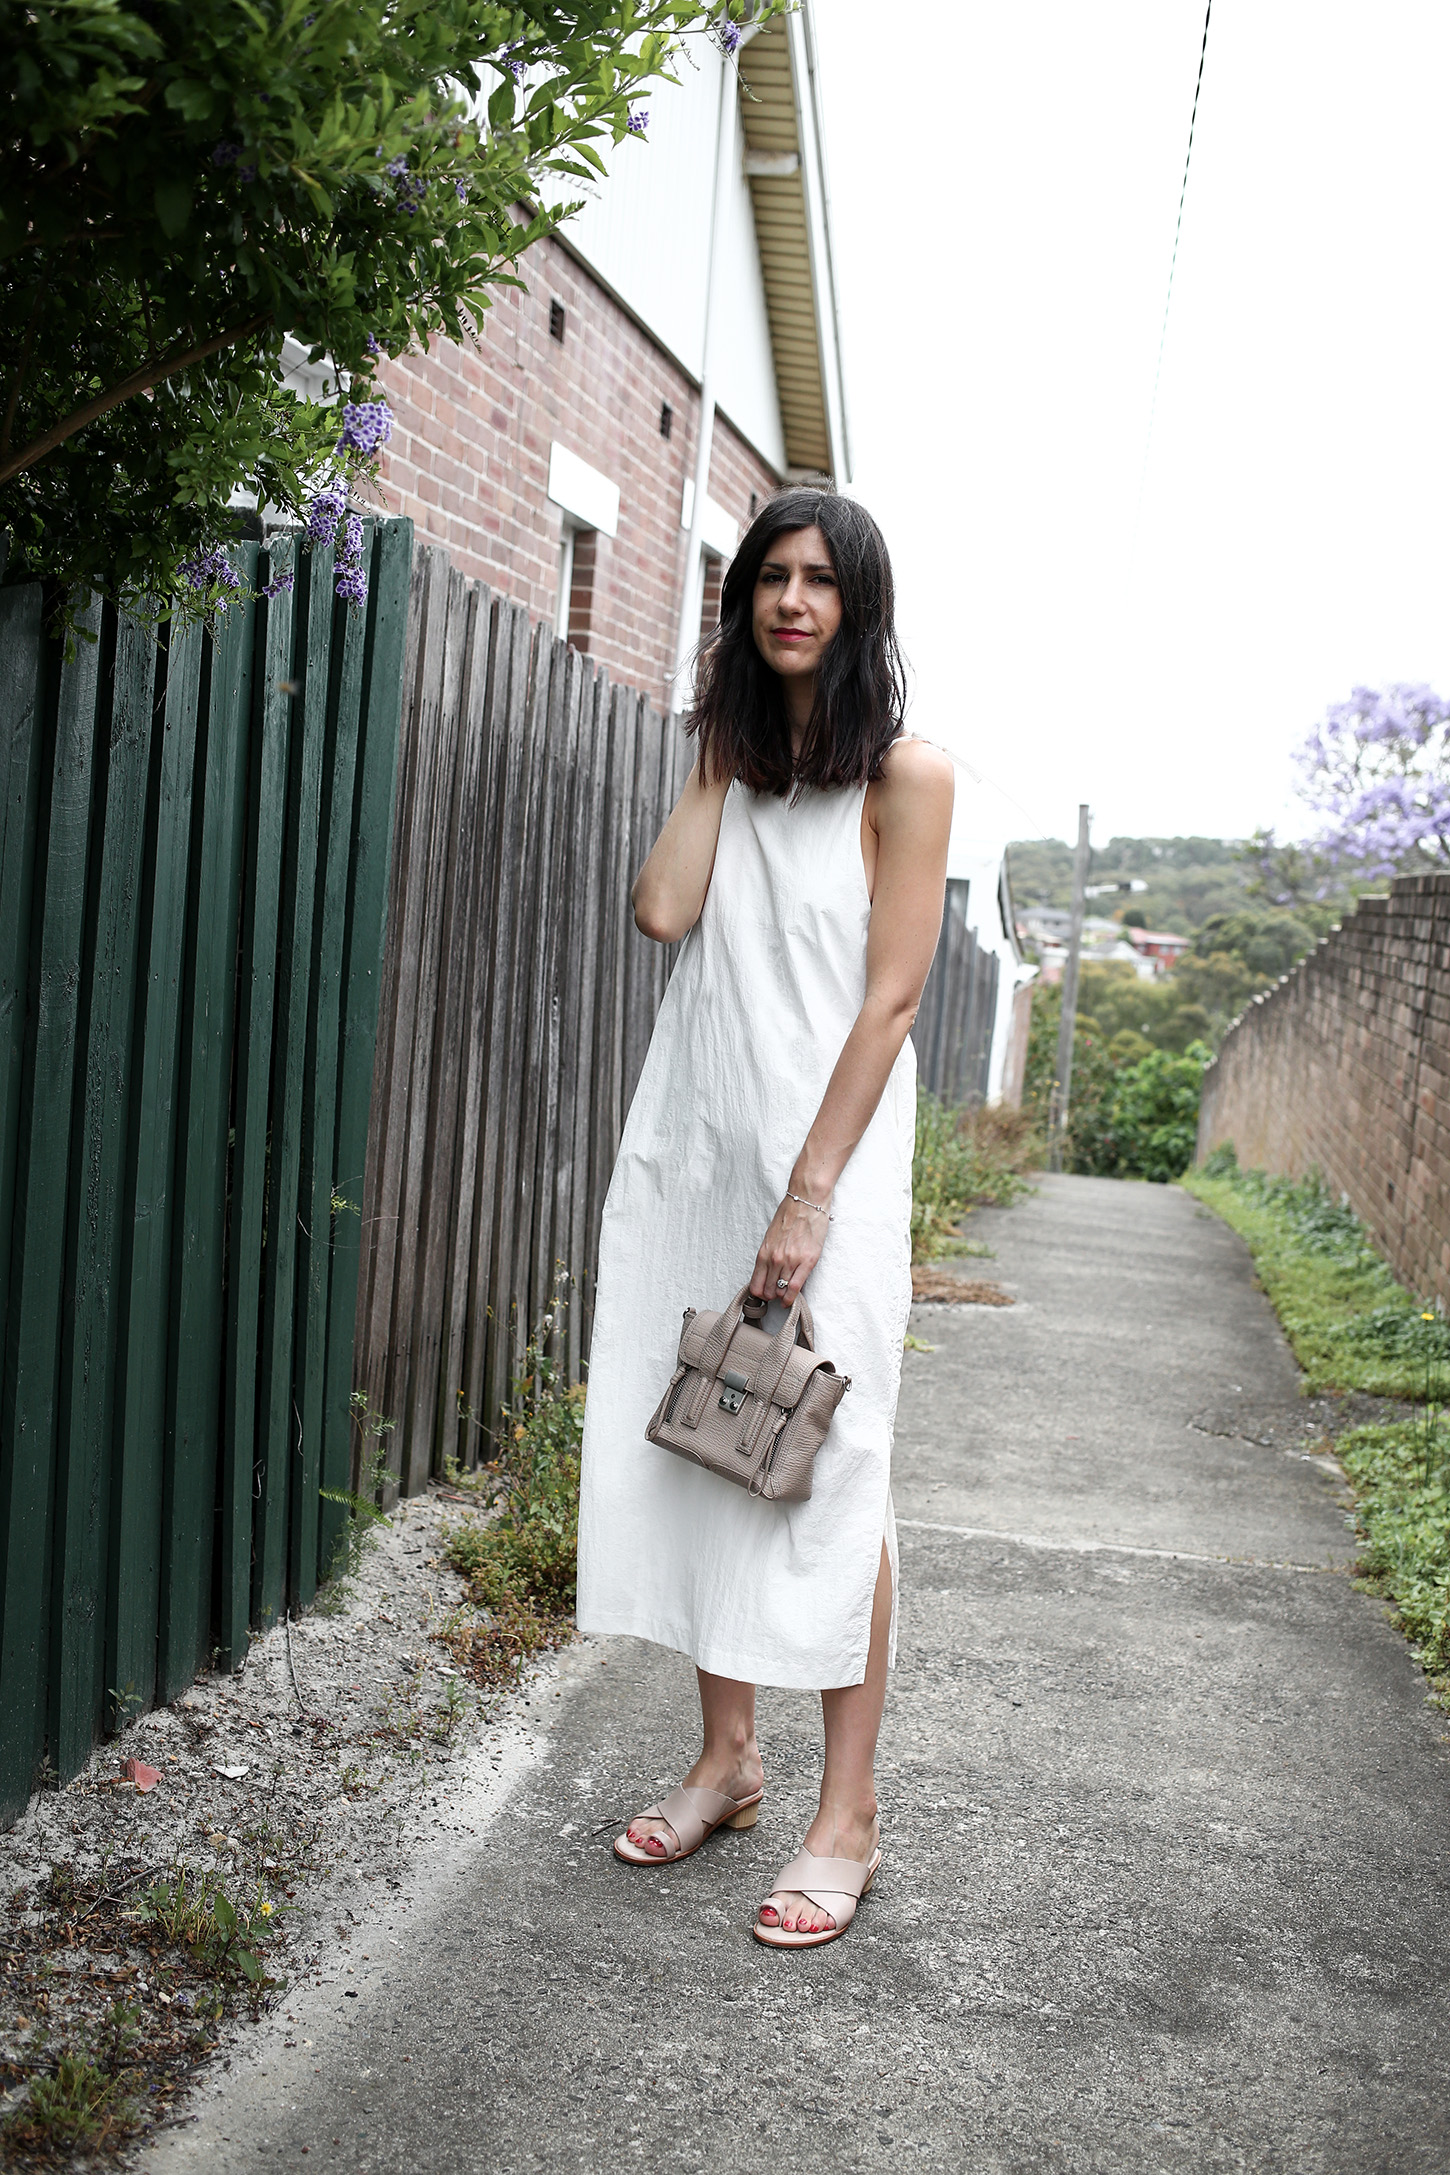 Wearing lately: White dress and nude mules | Mademoiselle | A Minimal Style  Fashion Blog